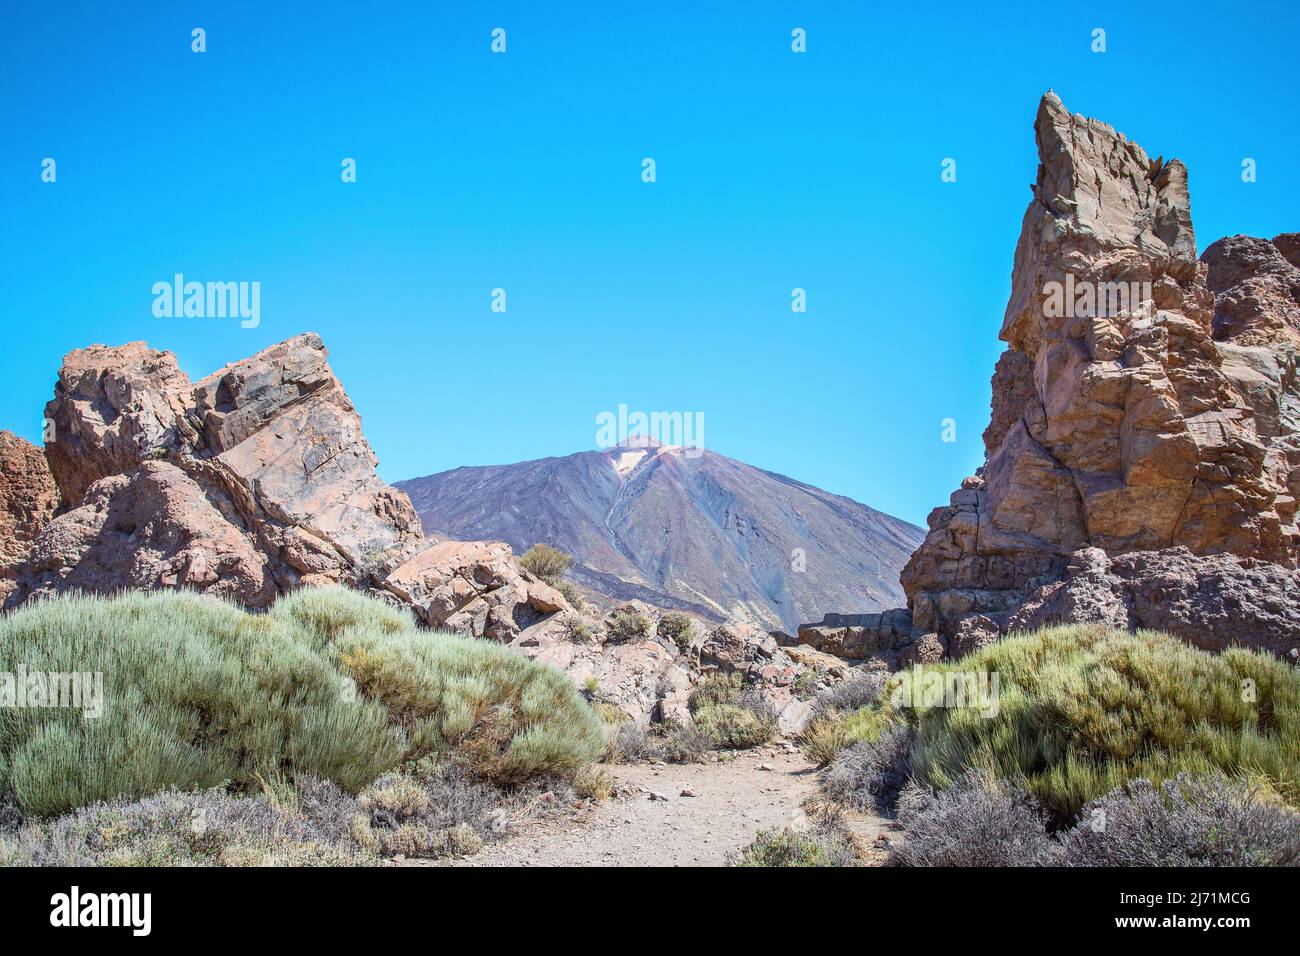 View of Volcano  El Teide   with volcanic rocks in The National Park of Las Canadas del Teide. Best place to visit  and walk in Tenerife Canary Island Stock Photo